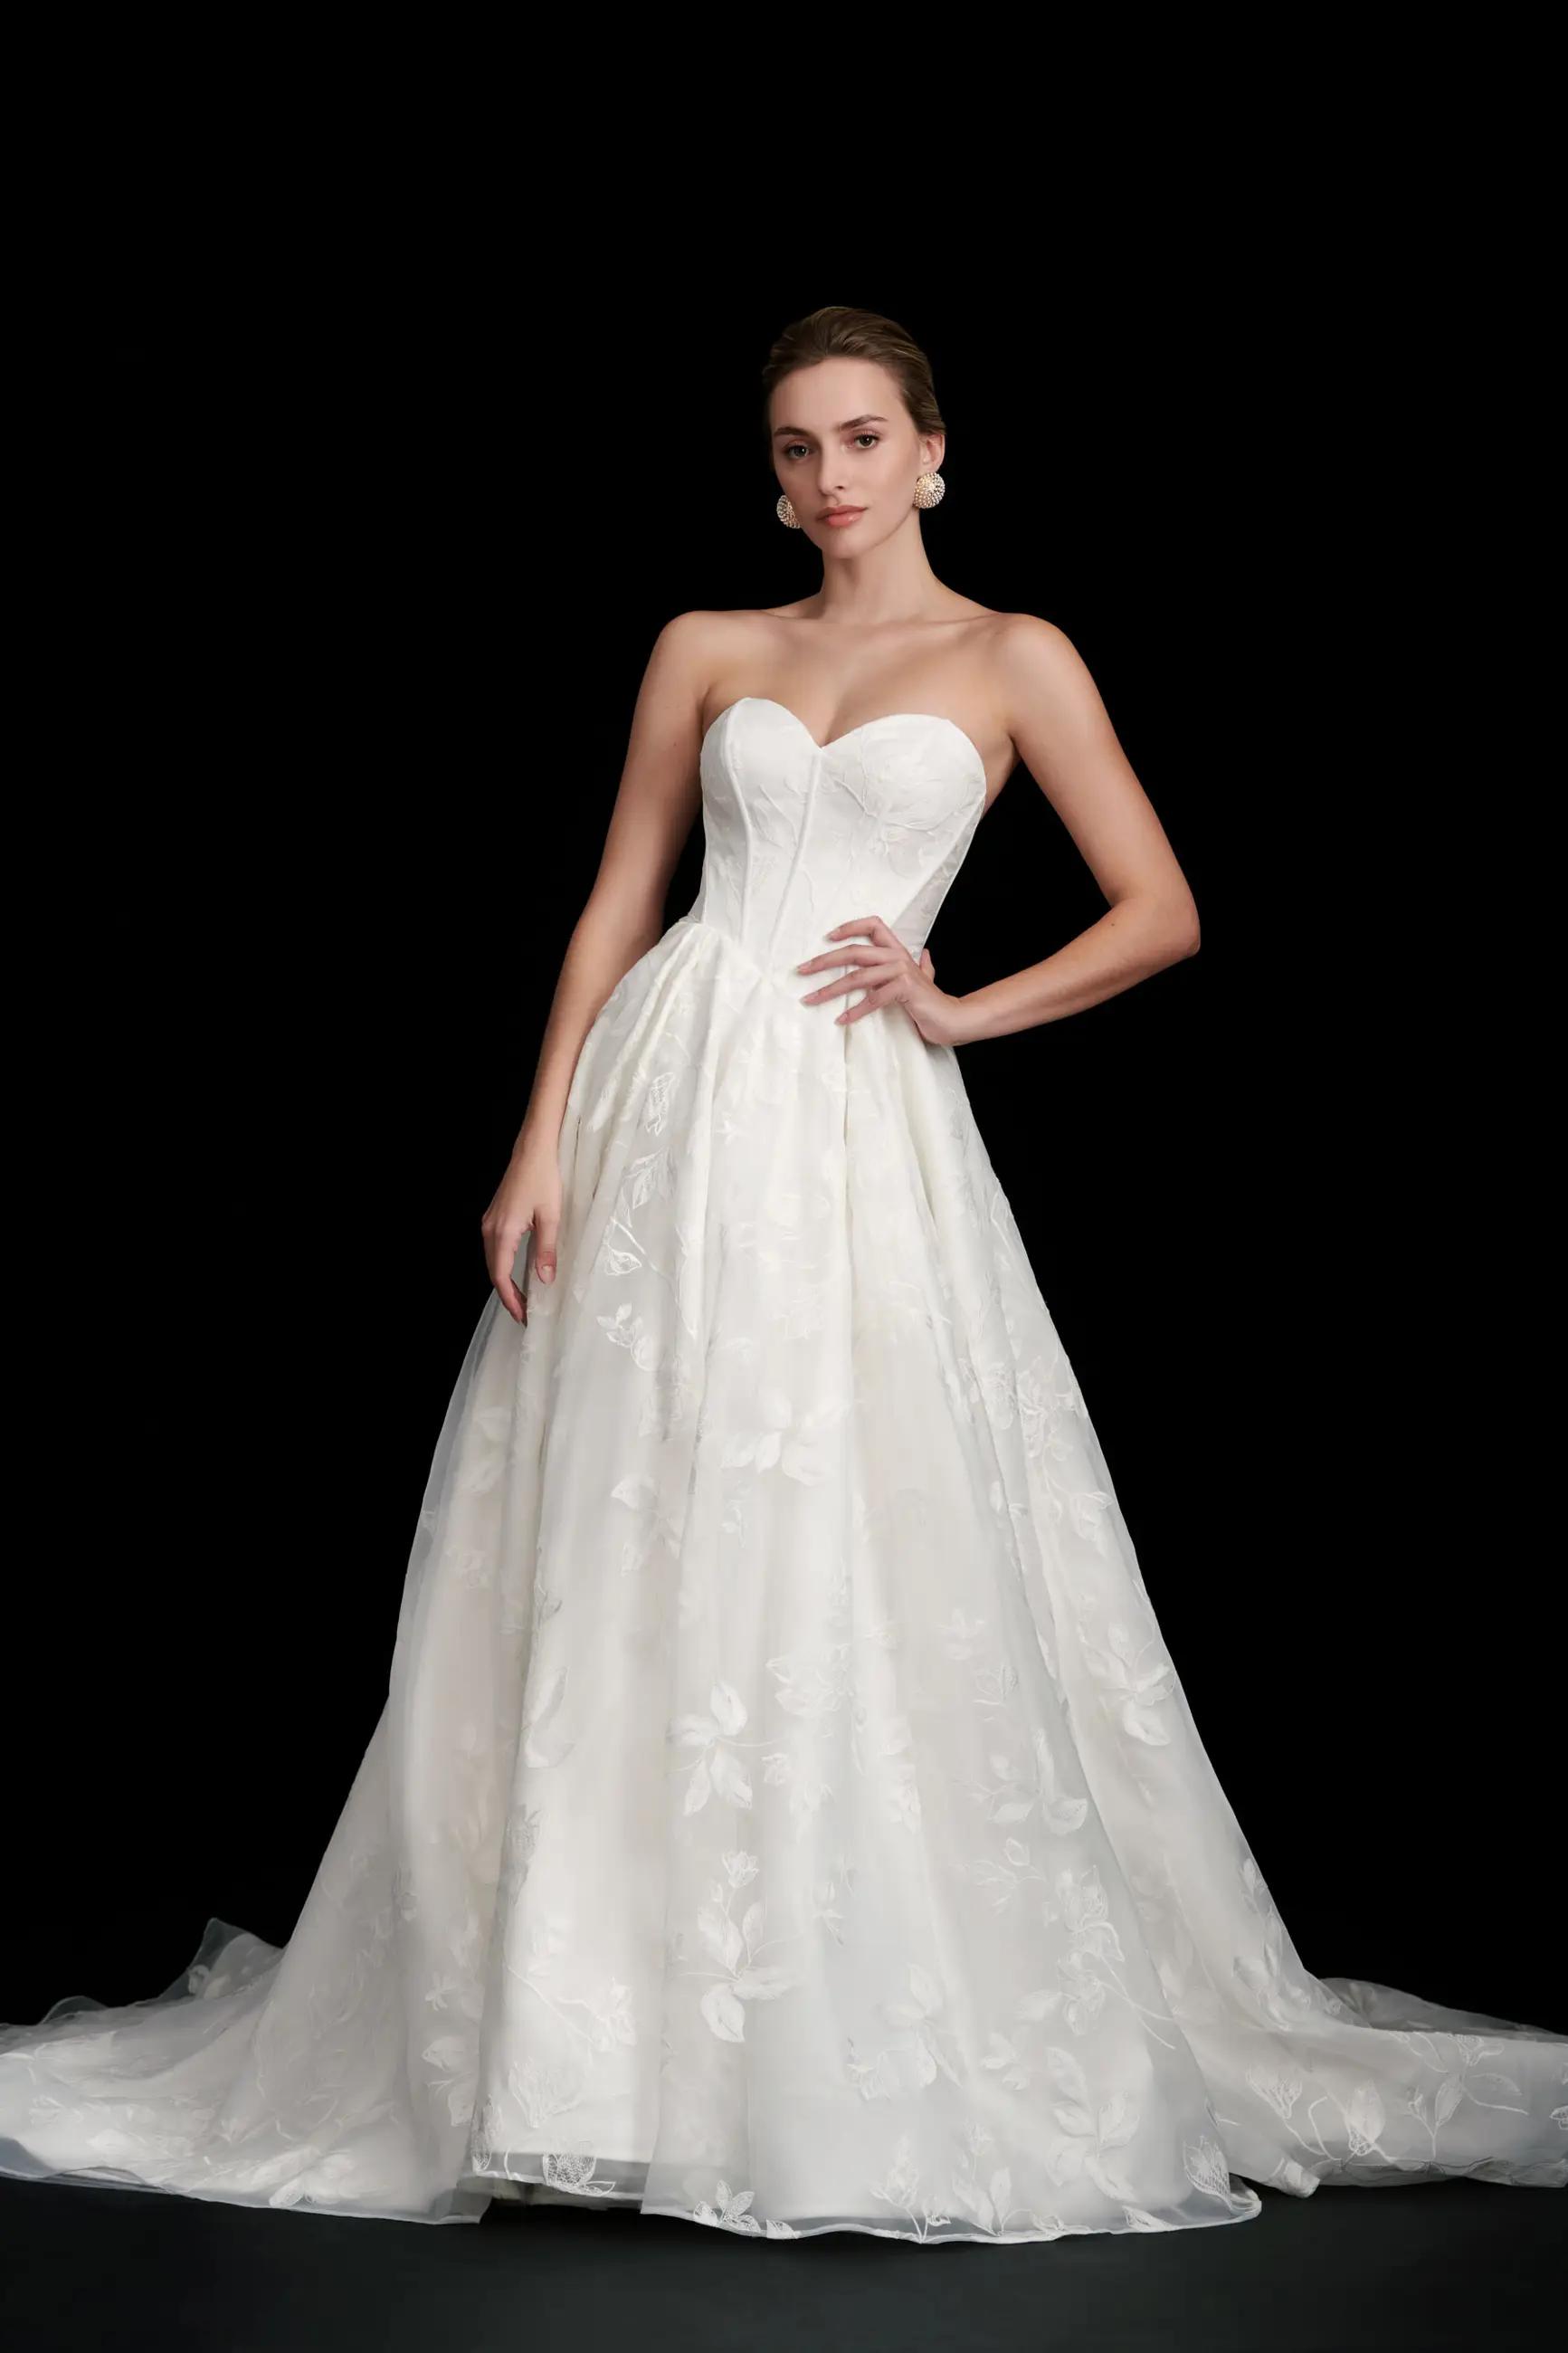 Noor wedding dress with floral embroidery and drop modified Basque waistline with sweetheart neckline and corset bodice ballgown skirt